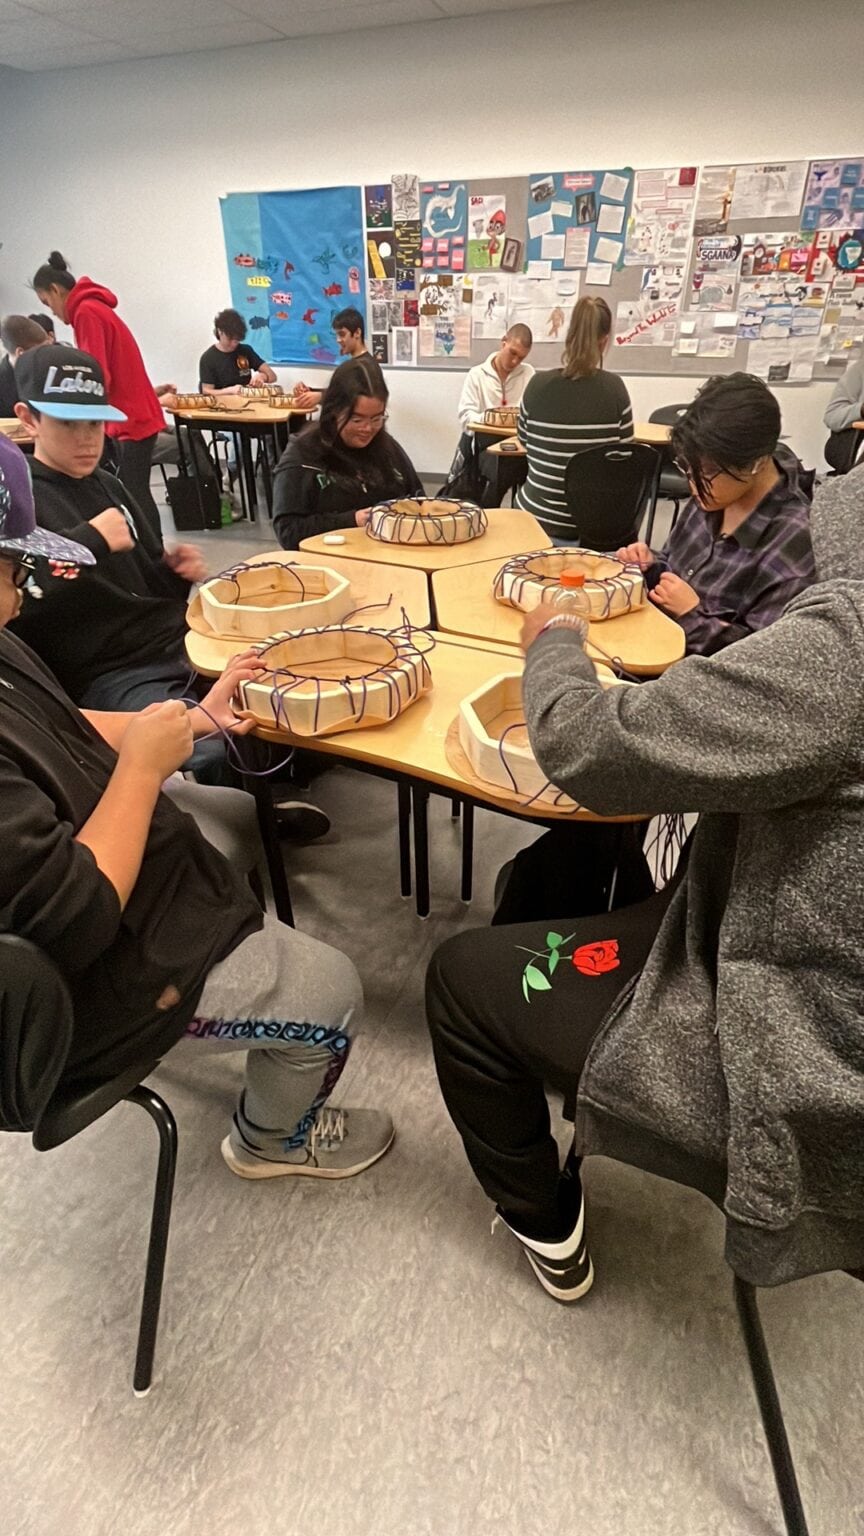 Youth gathered around a table making drums